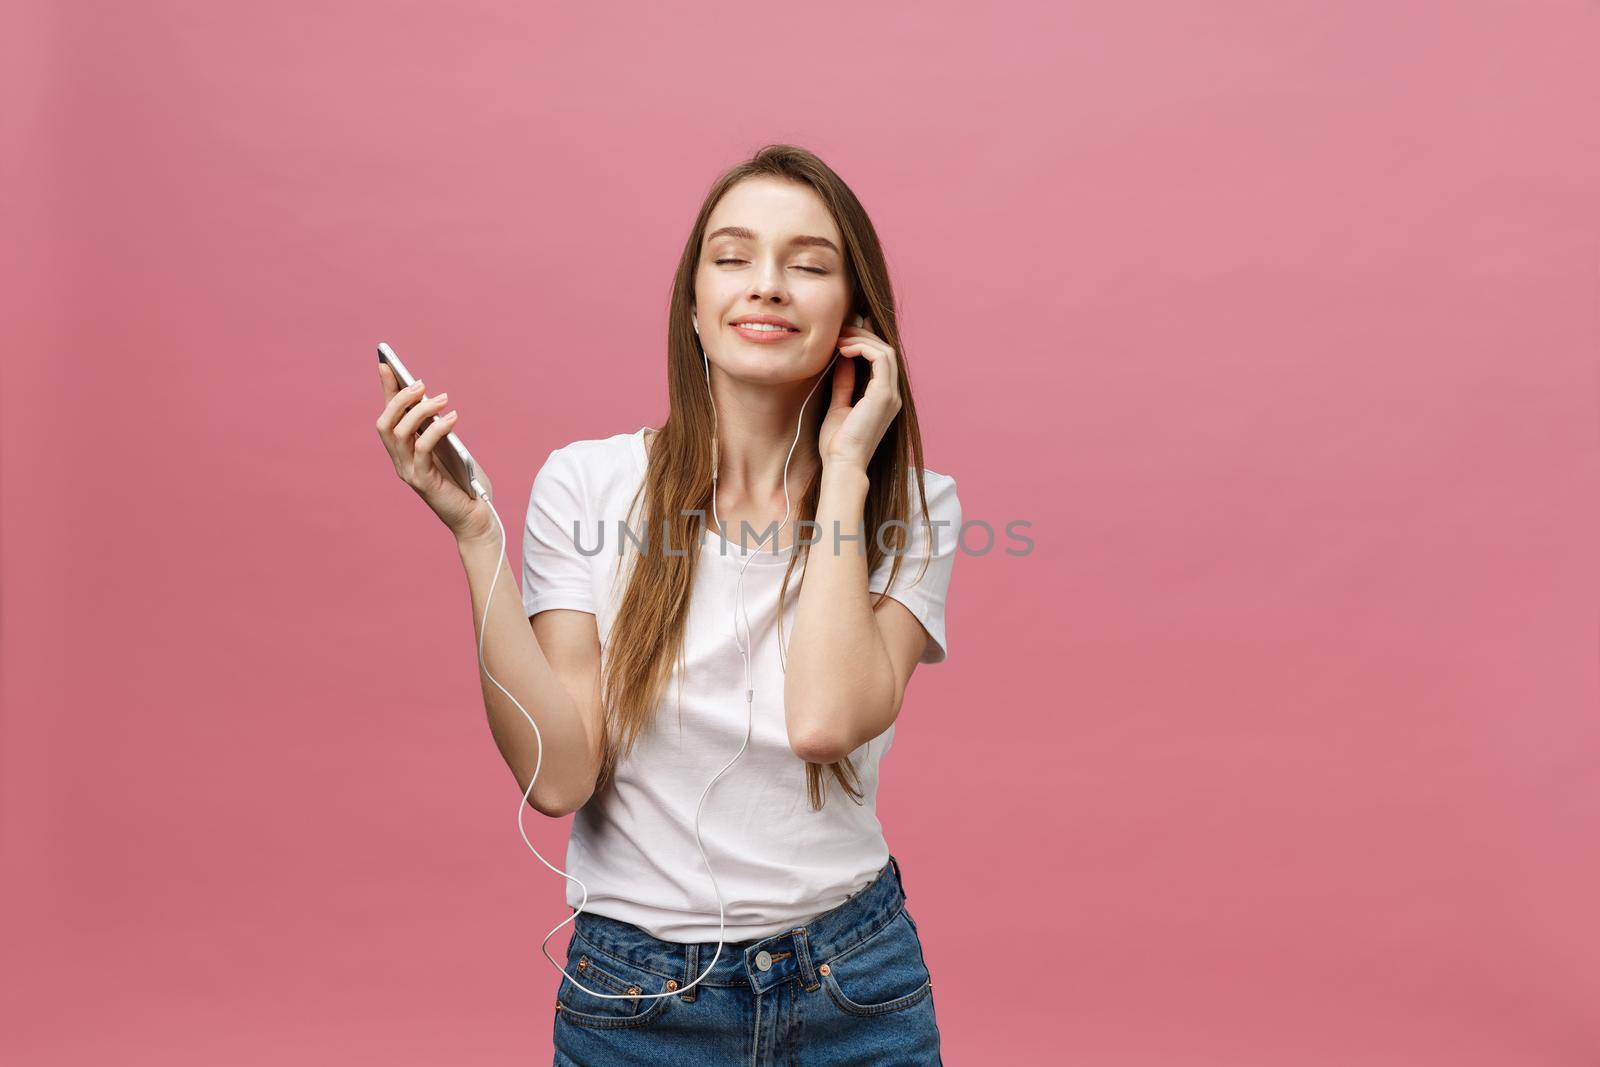 Lifestyle Concept. Young woman using phone for listening to music on pink background.